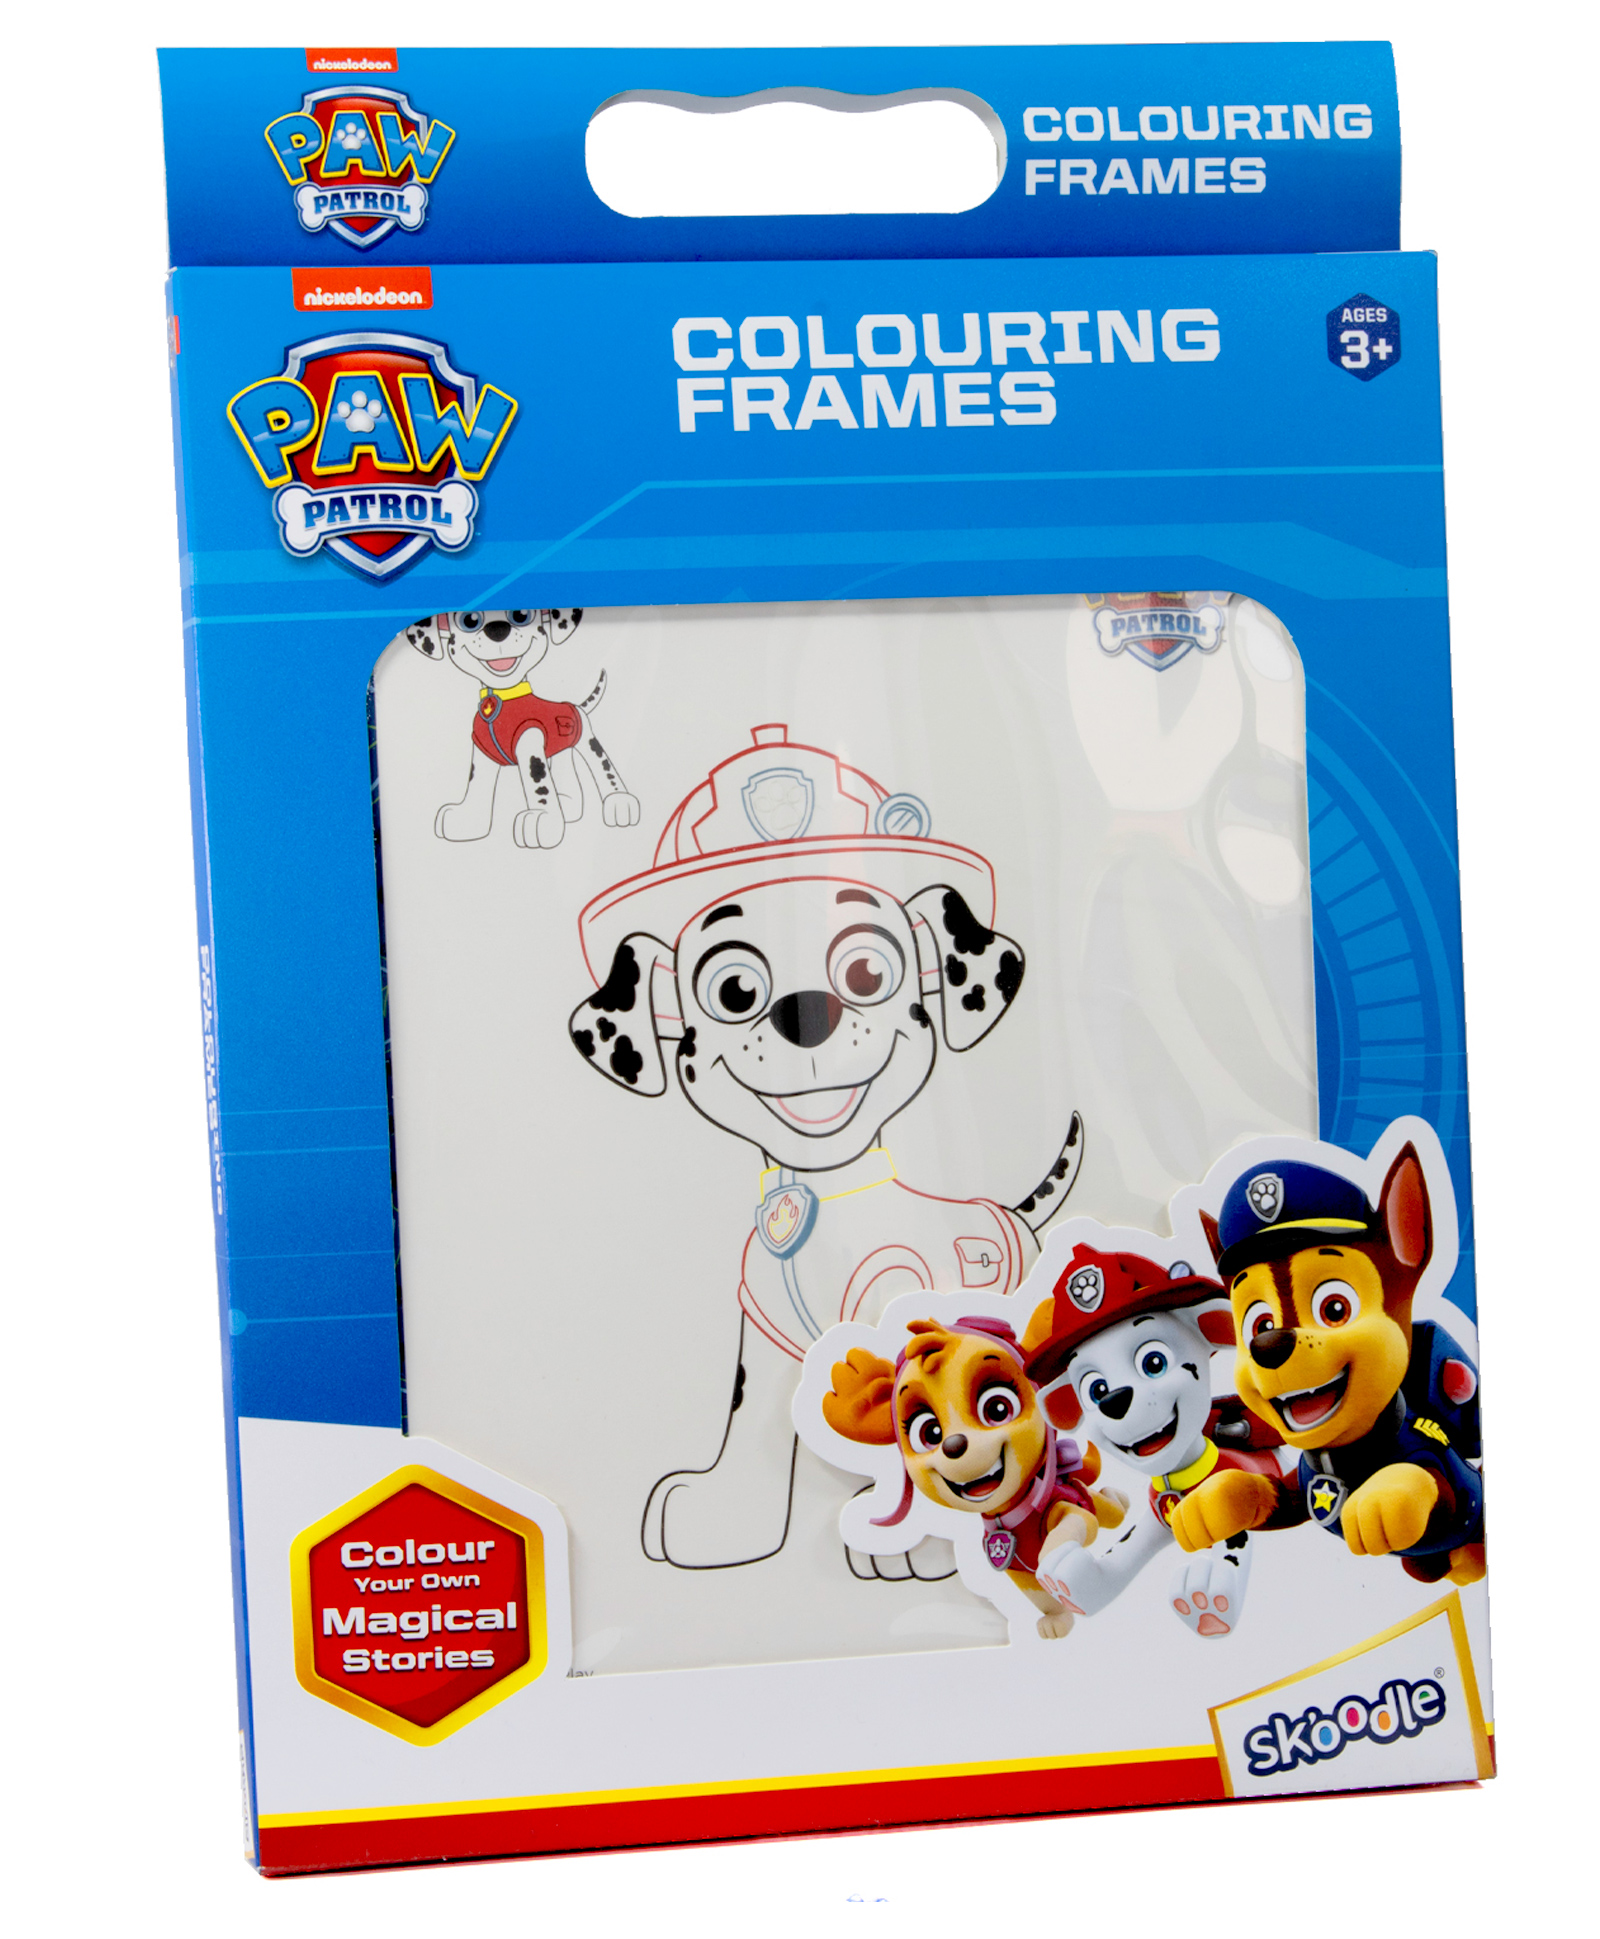 oppakken bedrag Op de grond Paw Patrol colouring frames - Height - 29 cm Online India, Buy Art &  Creativity Toys for (3-10 Years) at FirstCry.com - 11384394